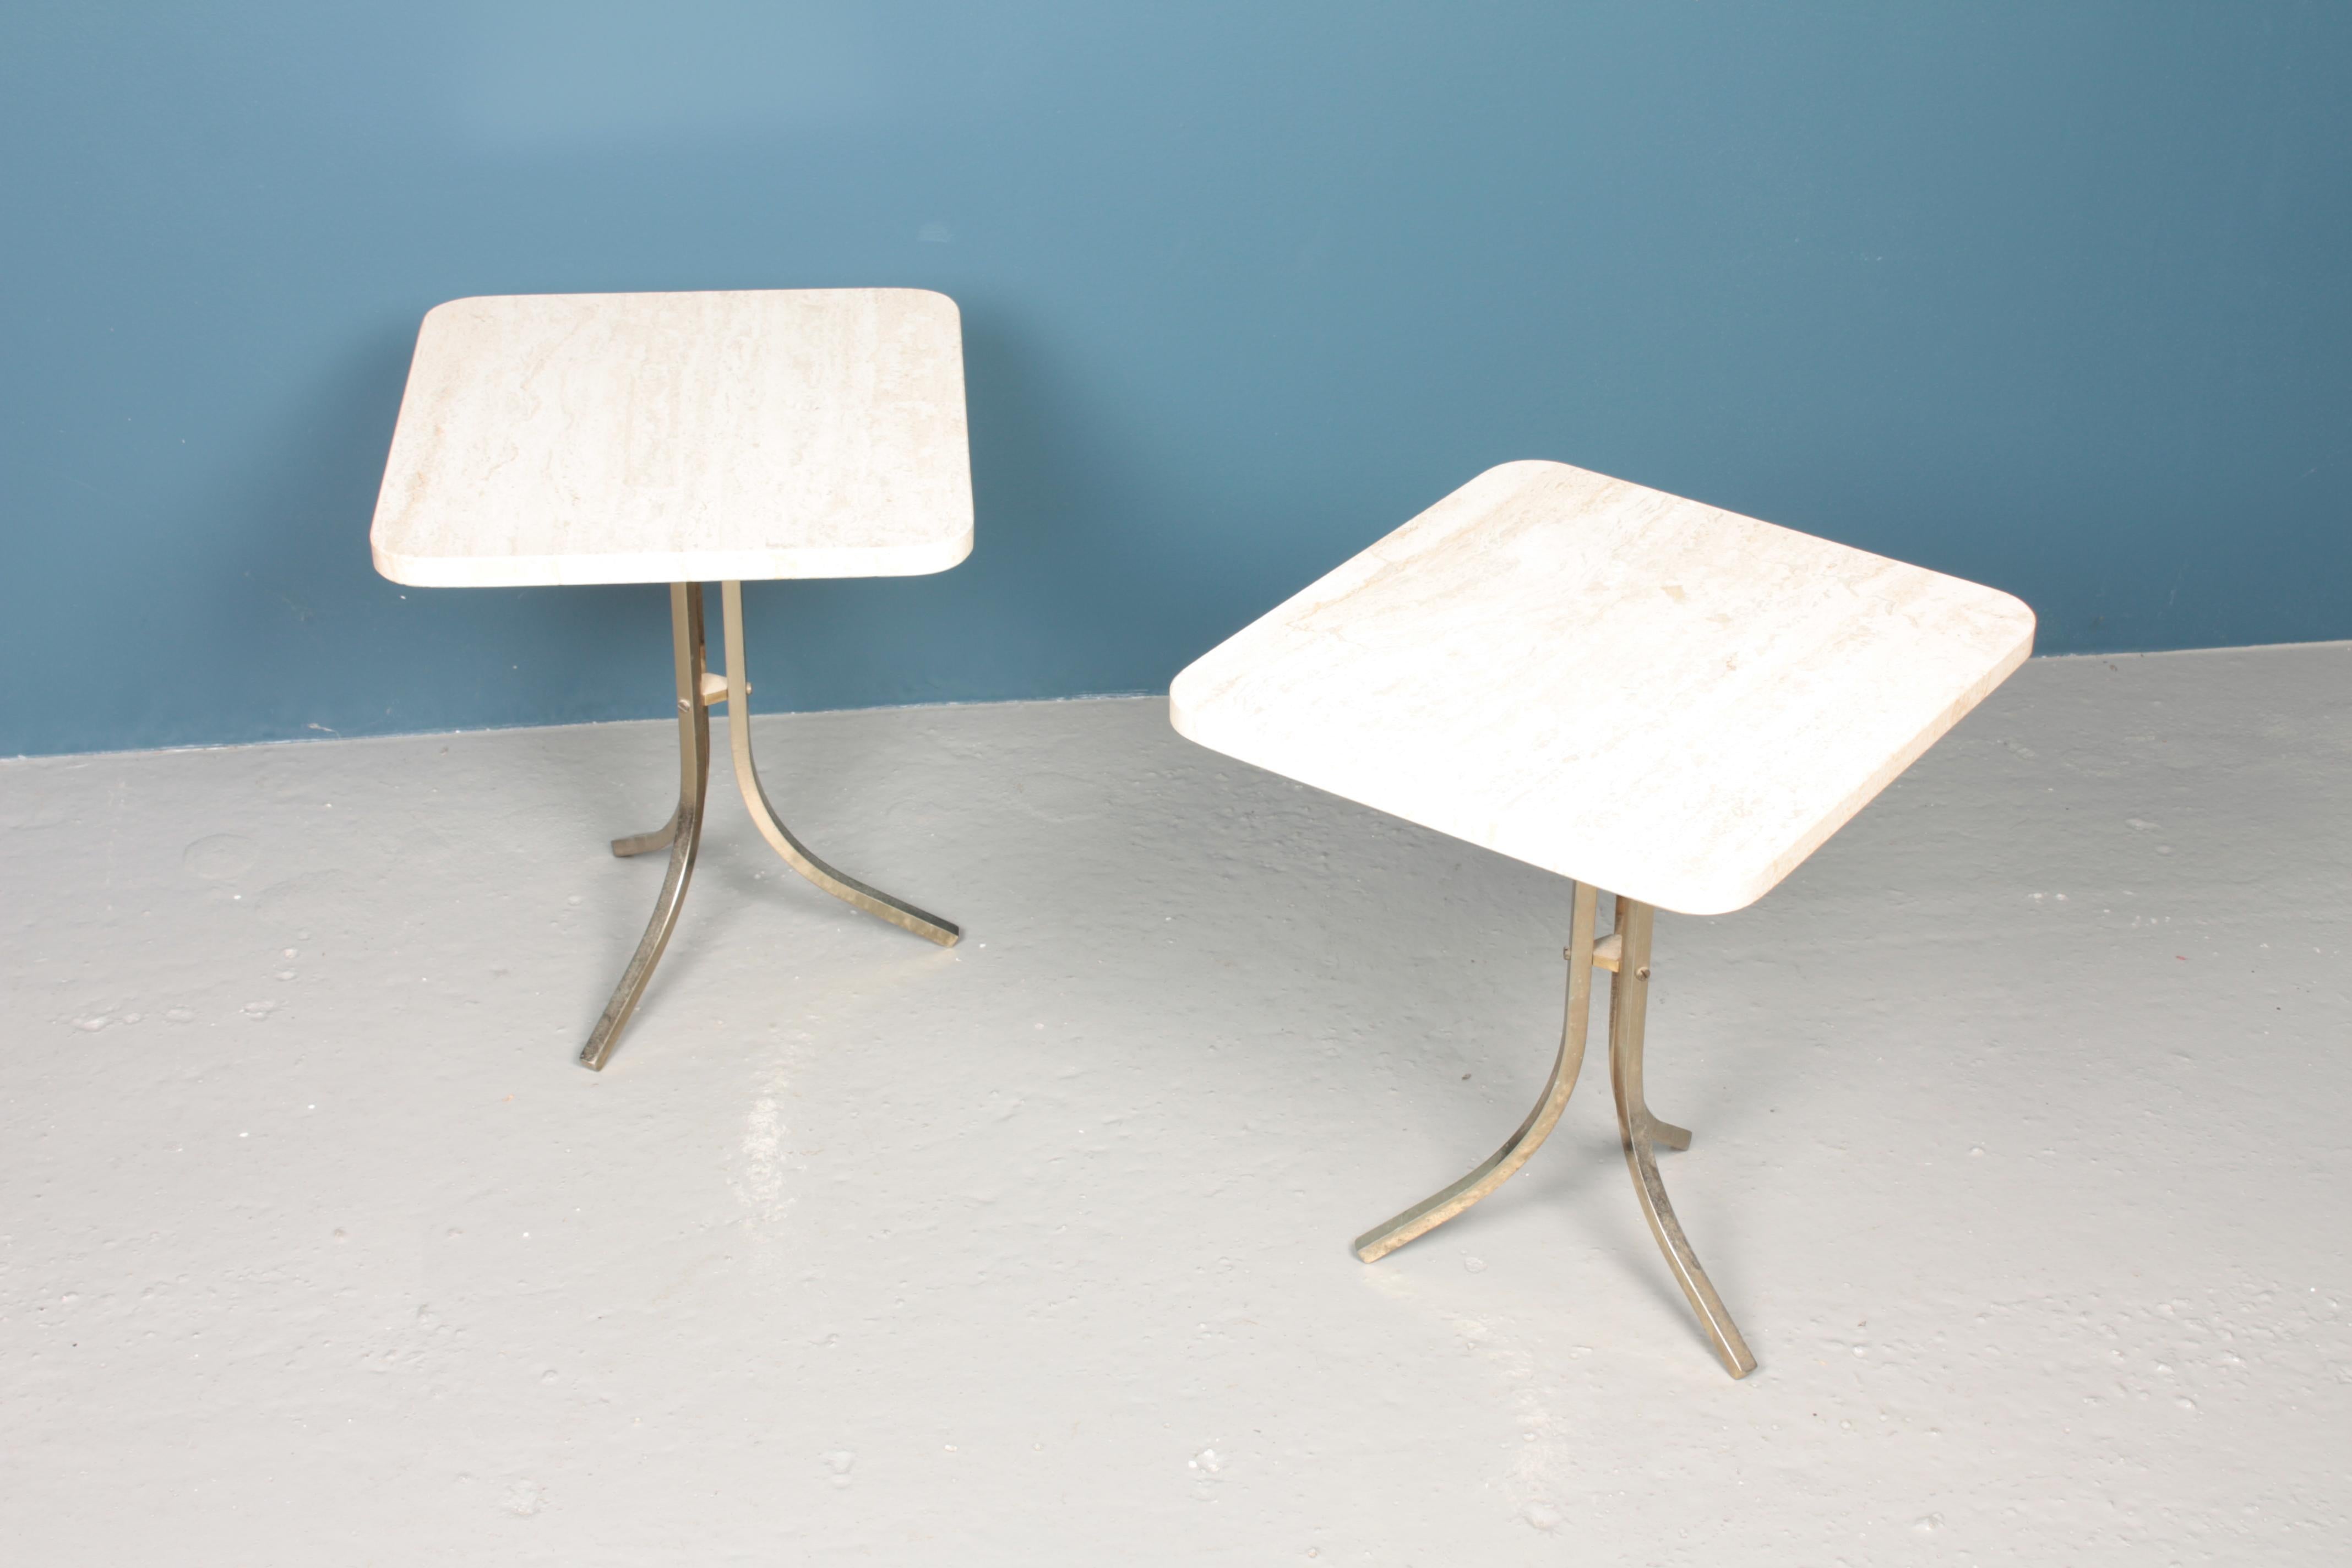 Scandinavian Modern Pair of Midcentury Side Tables in Brass and Travertine, 1960s For Sale